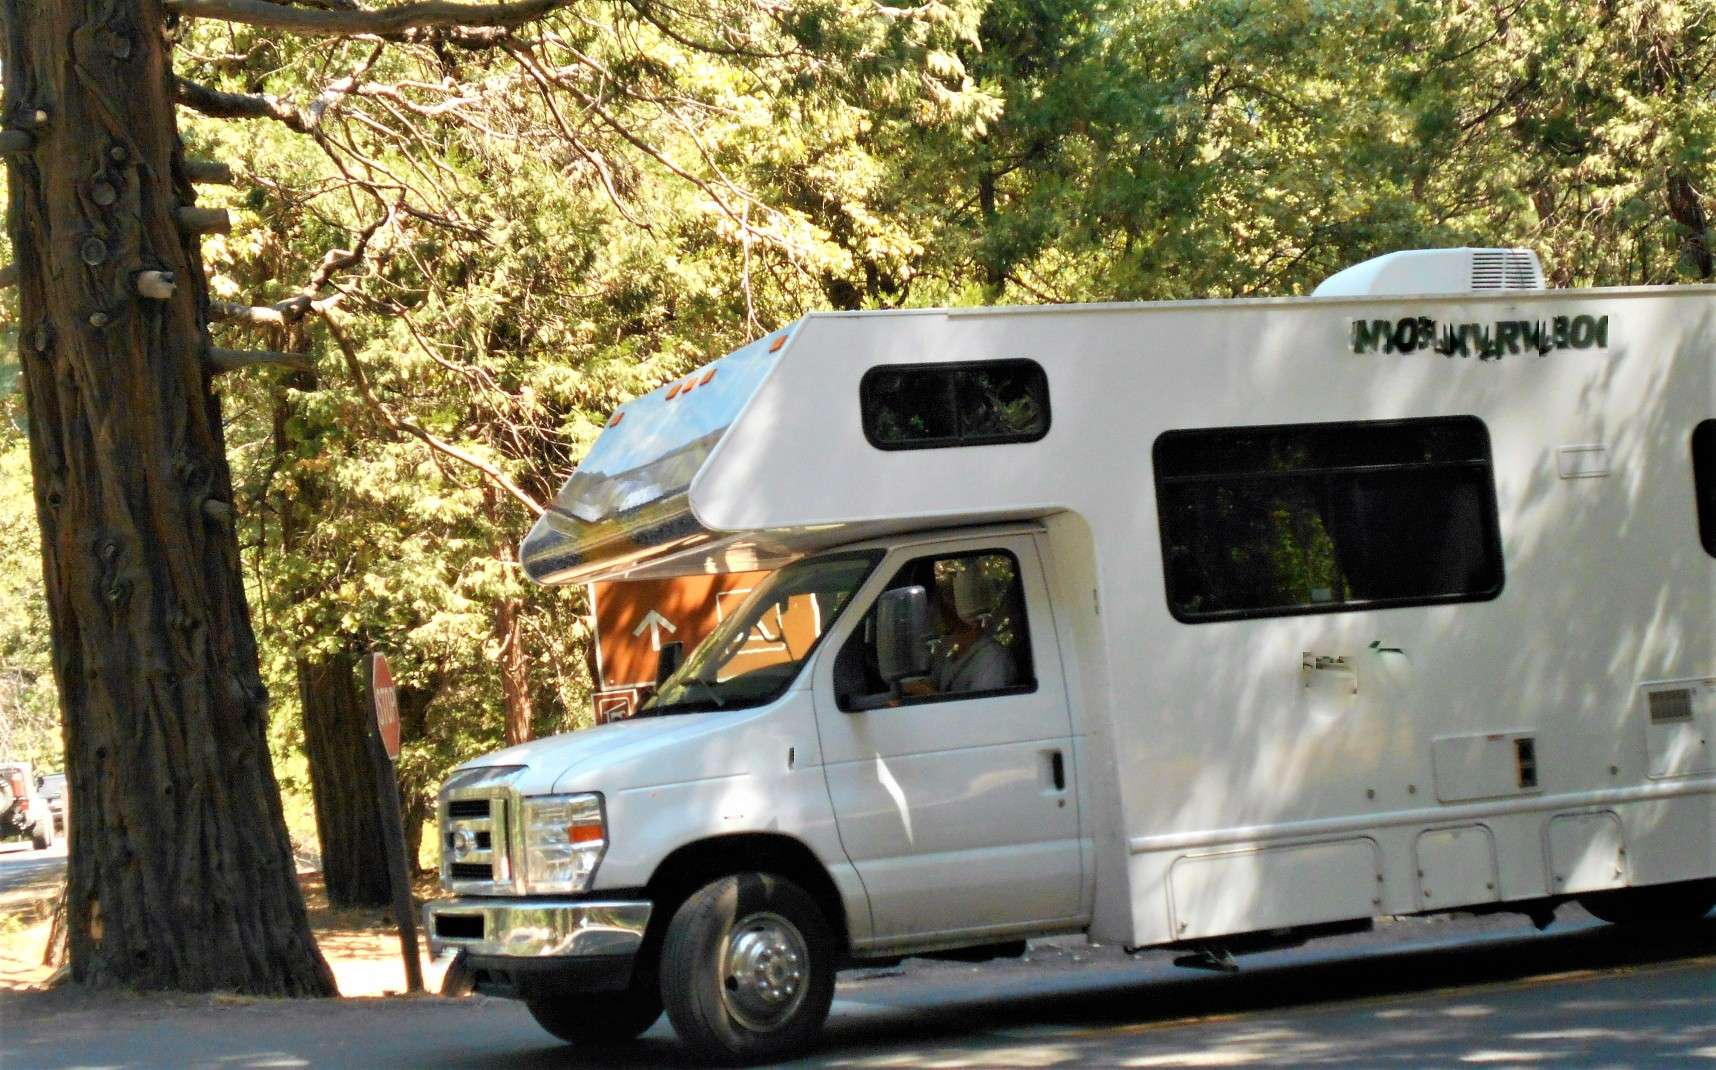 RV parked at campsite amongst trees